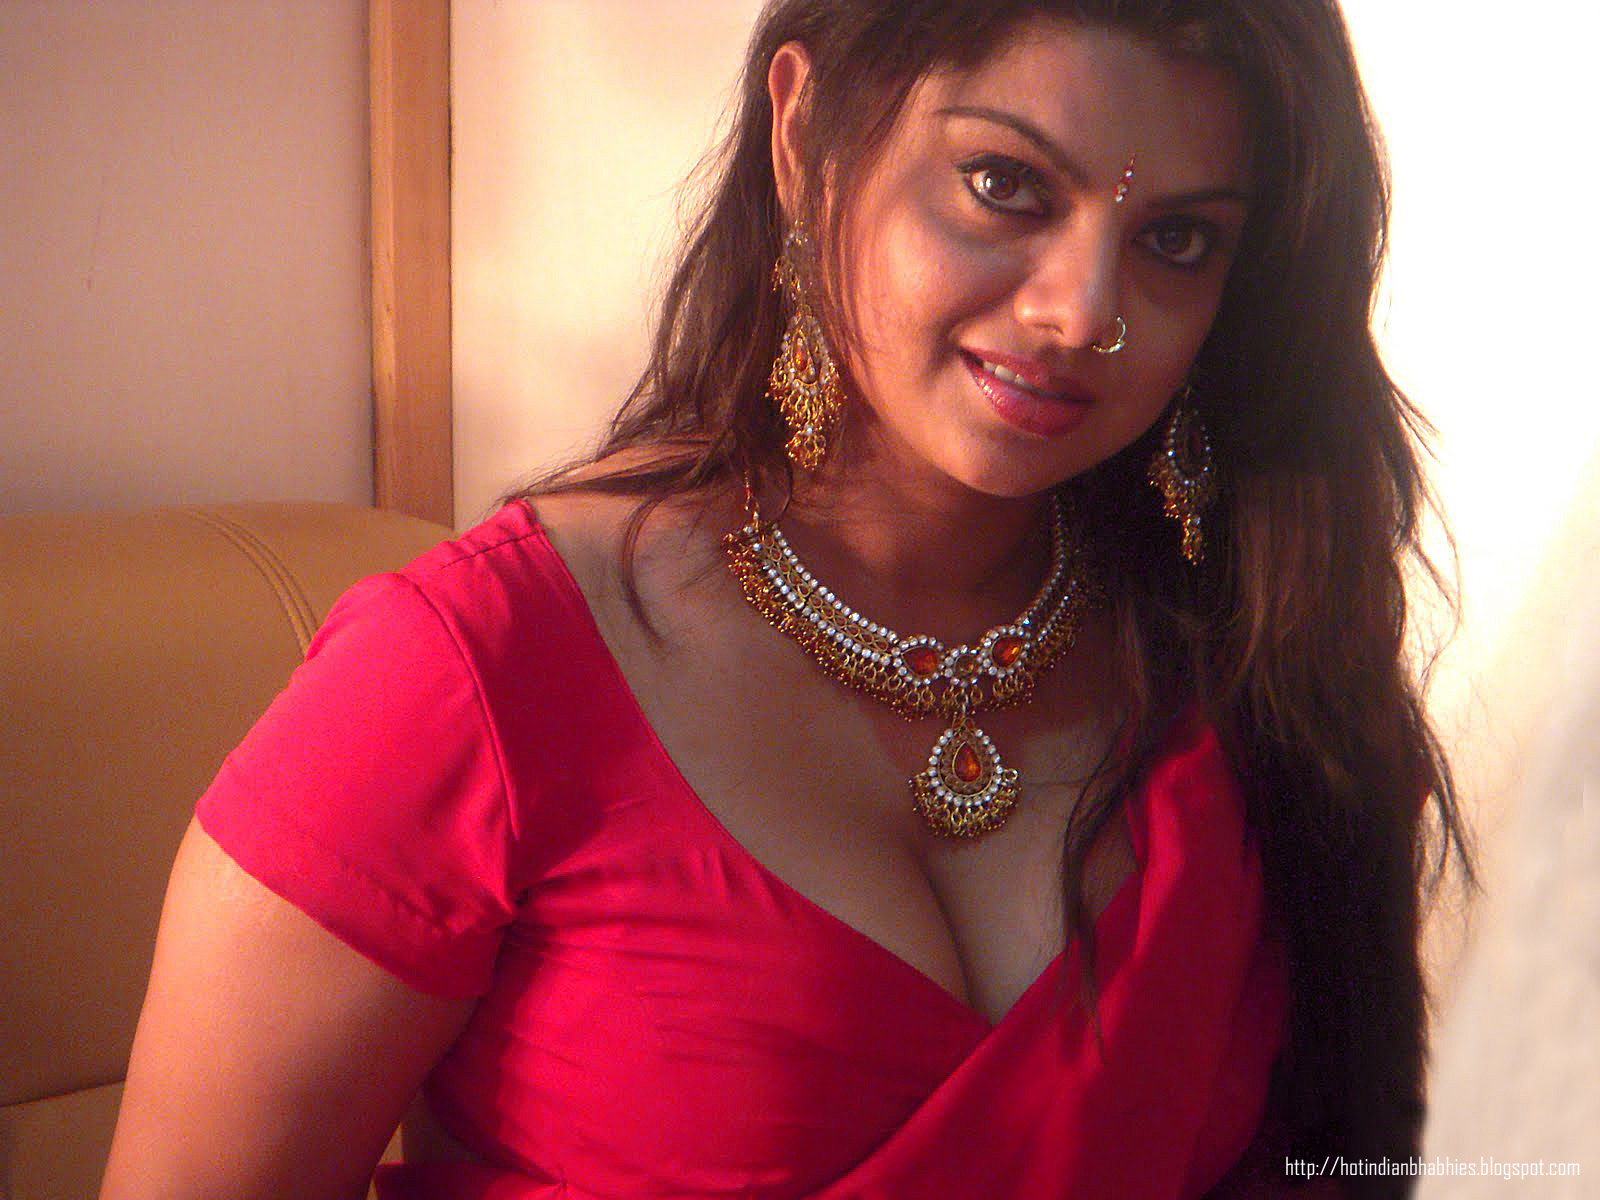 http://4.bp.blogspot.com/-73ASdnUQ2Cs/TZIzFqE93YI/AAAAAAAAH2c/idKu_fOfbzA/s1600/1-Swathi-Varma-Hot-Photo-gallery-arabic-tamil-indian-sexy-babes-house-wife-sex-pictures-bed-room-pictures-nude-pisture-sari-pictures-big-boobs-tits-pictures-indian-tamil-big-ass-hot-bikini.jpg%2525253Fclassic%2525252520teen%2525252520vintage%2525252520xhamster%2525252520movies%253Fsweet%252520young%252520latinas%252520amituer%252520teen%252520young%252520fantasty%252520models?young%20legal%20teen%20models%20%20